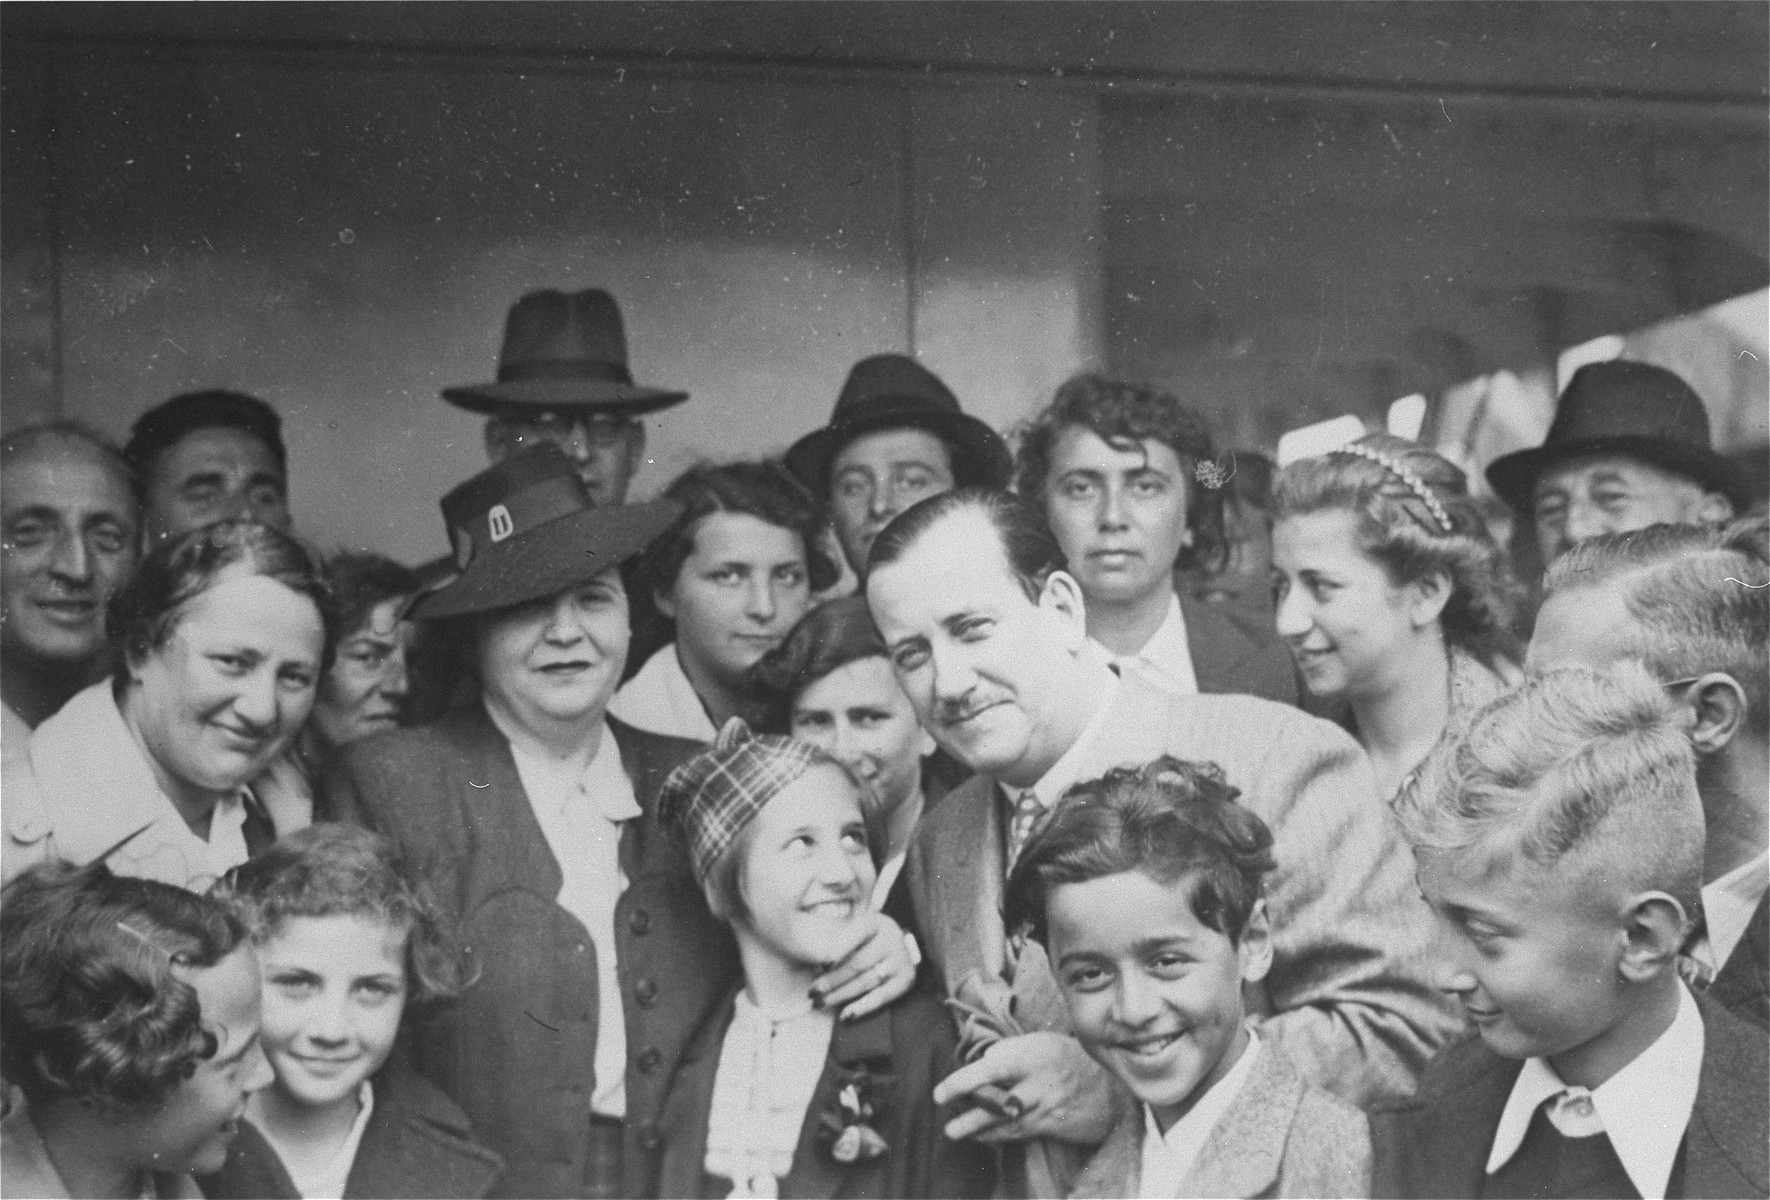 Mr. and Mrs. Morris Troper meet with passengers on board the refugee ship MS St. Louis.  

Also pictured are Liesel Joseph, Ruth Karliner, Heinz Gallant and Windmueller.